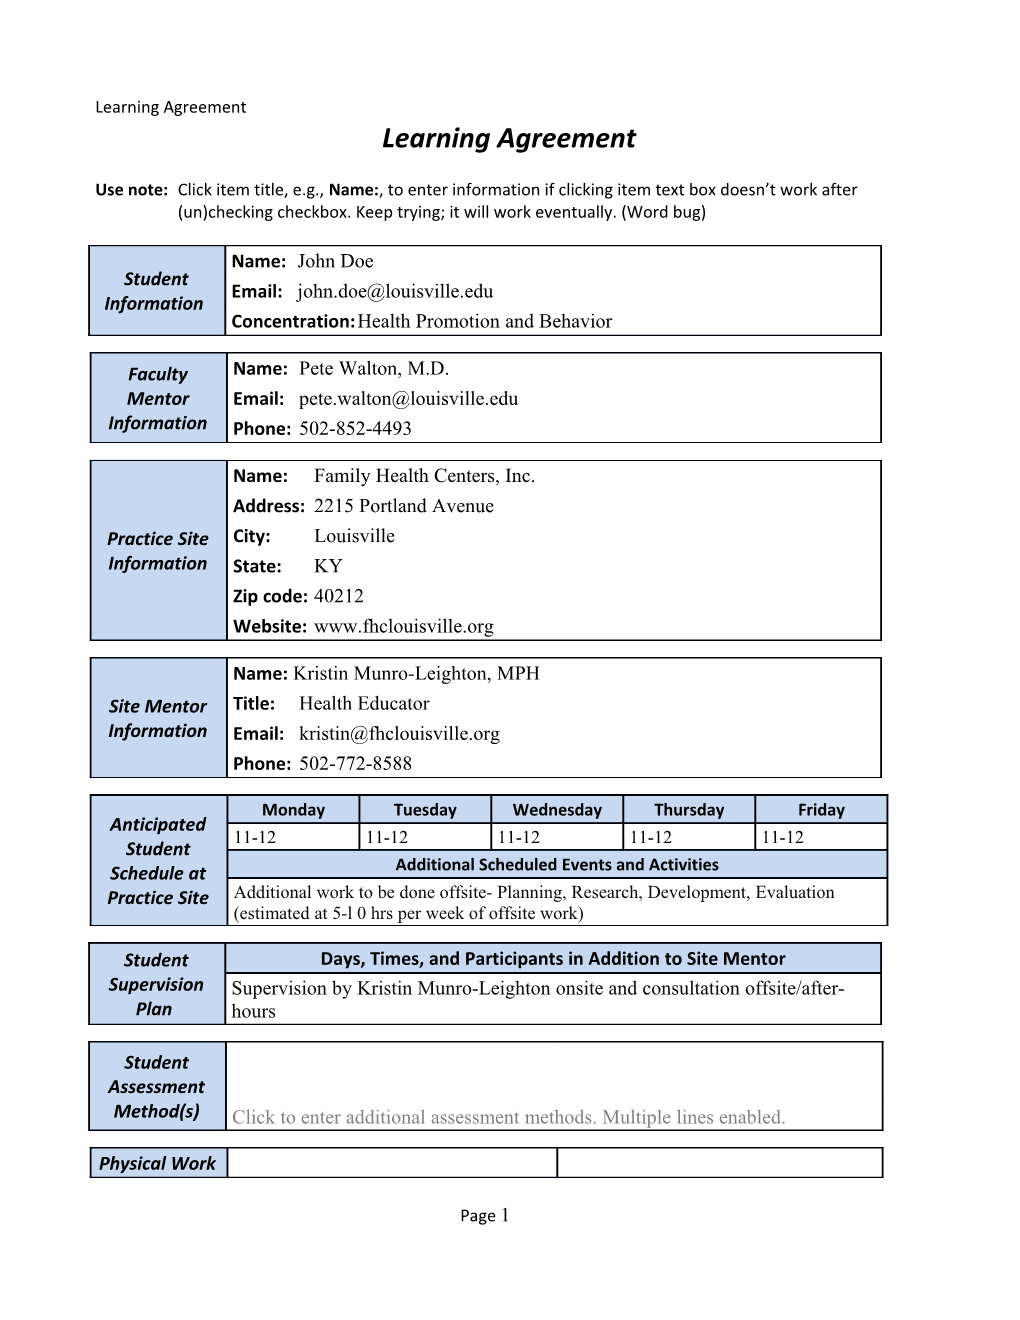 Learning Agreement Sample Using Form